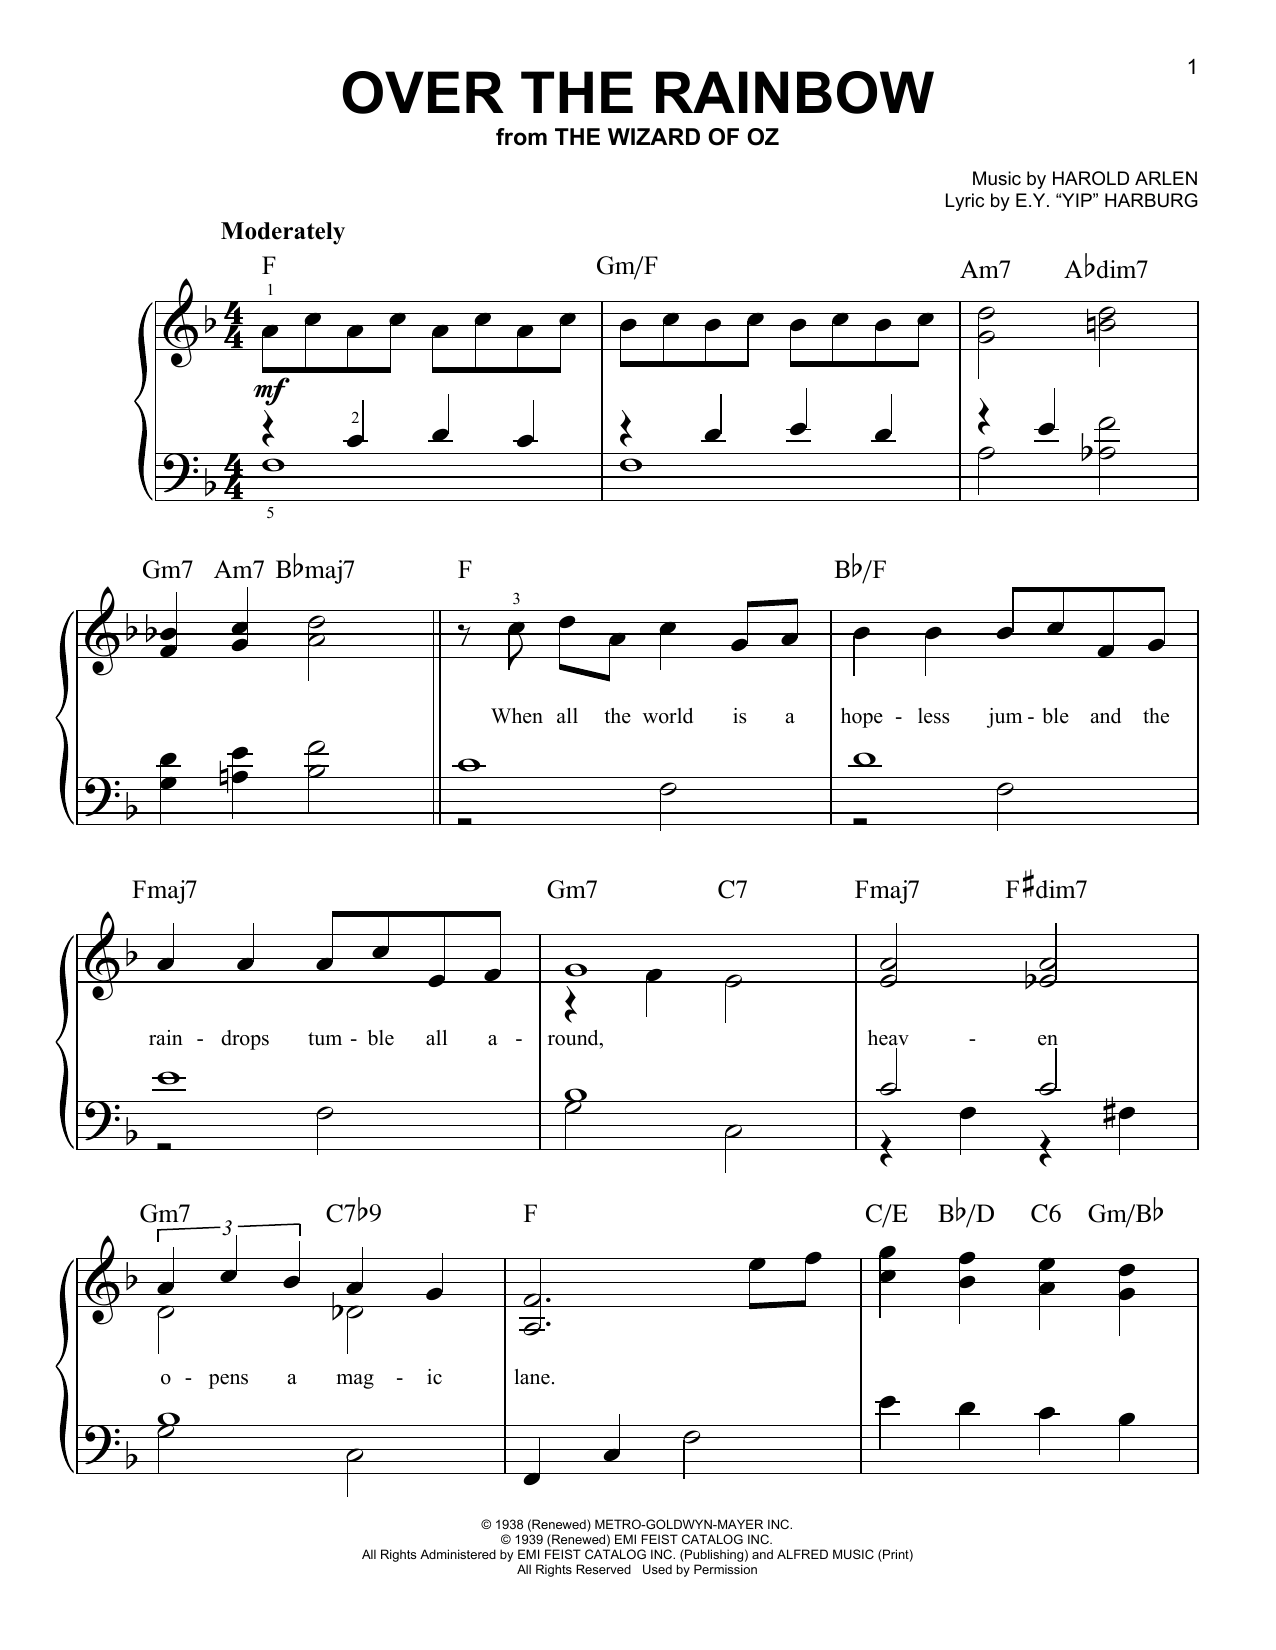 Harold Arlen Over The Rainbow sheet music notes and chords. Download Printable PDF.